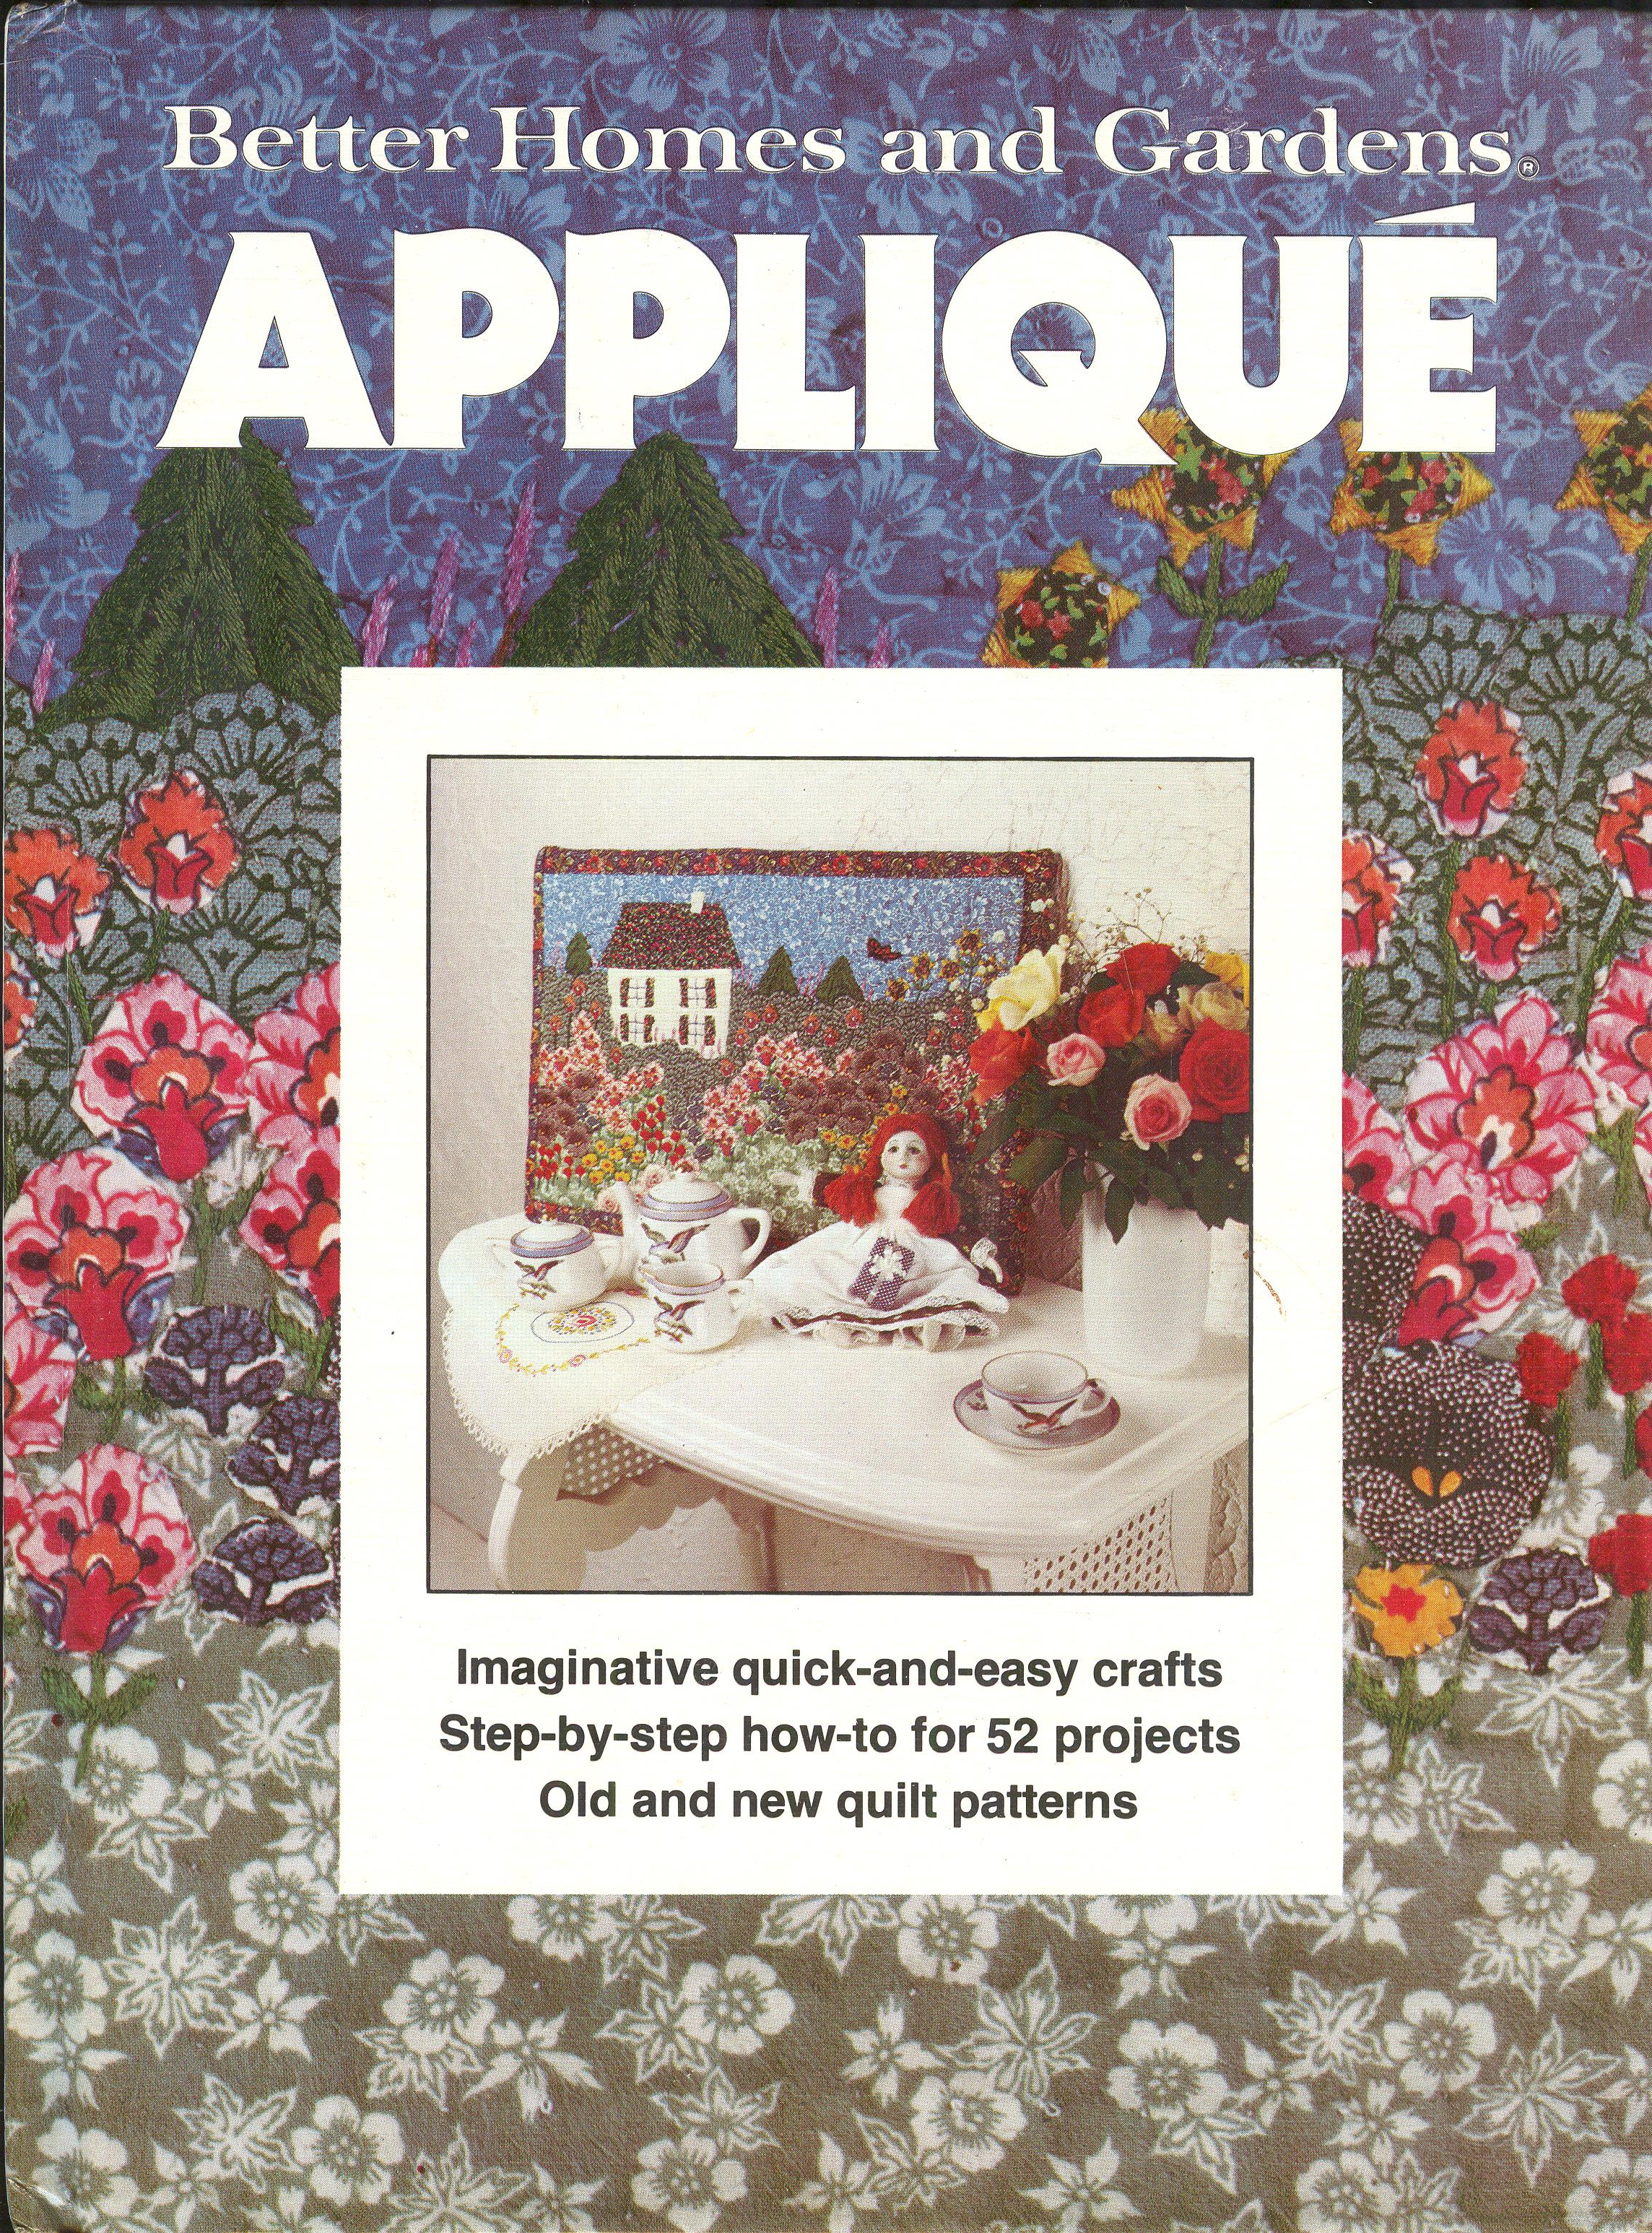 Image for Appliqué (Better Homes and Gardens)